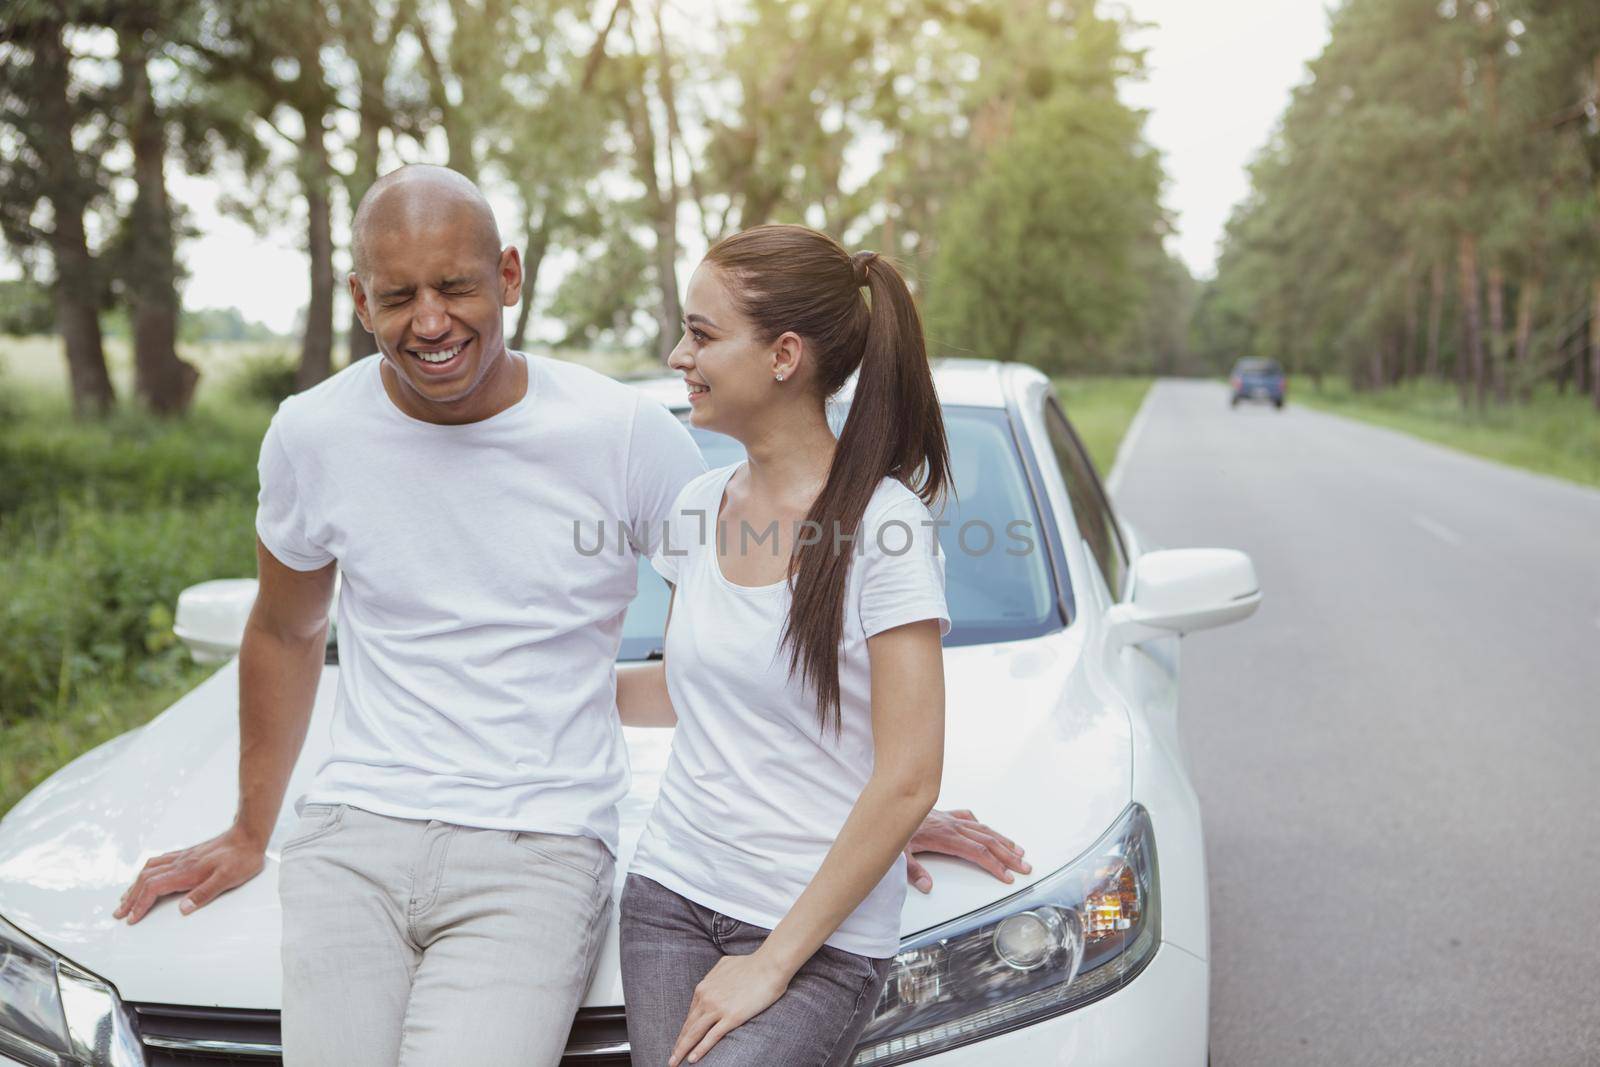 Lovely young couple laughing, enjoying their roadtrip on a car, copy space. Handsome African man laughing, embracing his girlfriend, leaning on a car on the side of the road